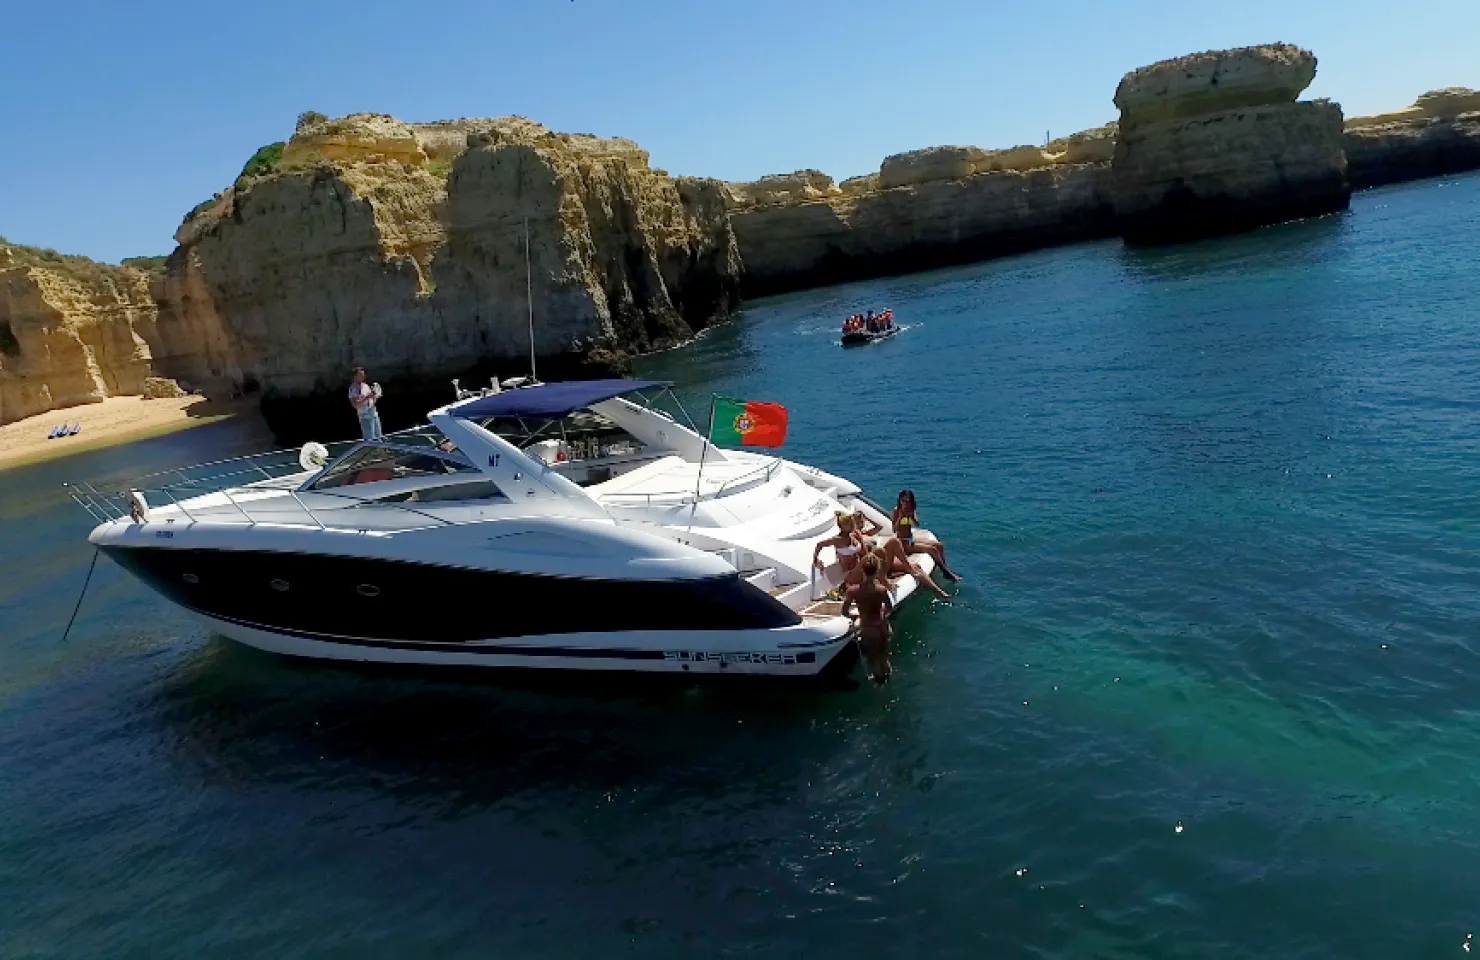 Afternoon Luxury Cruise - ALGARVE YACHT CHARTER